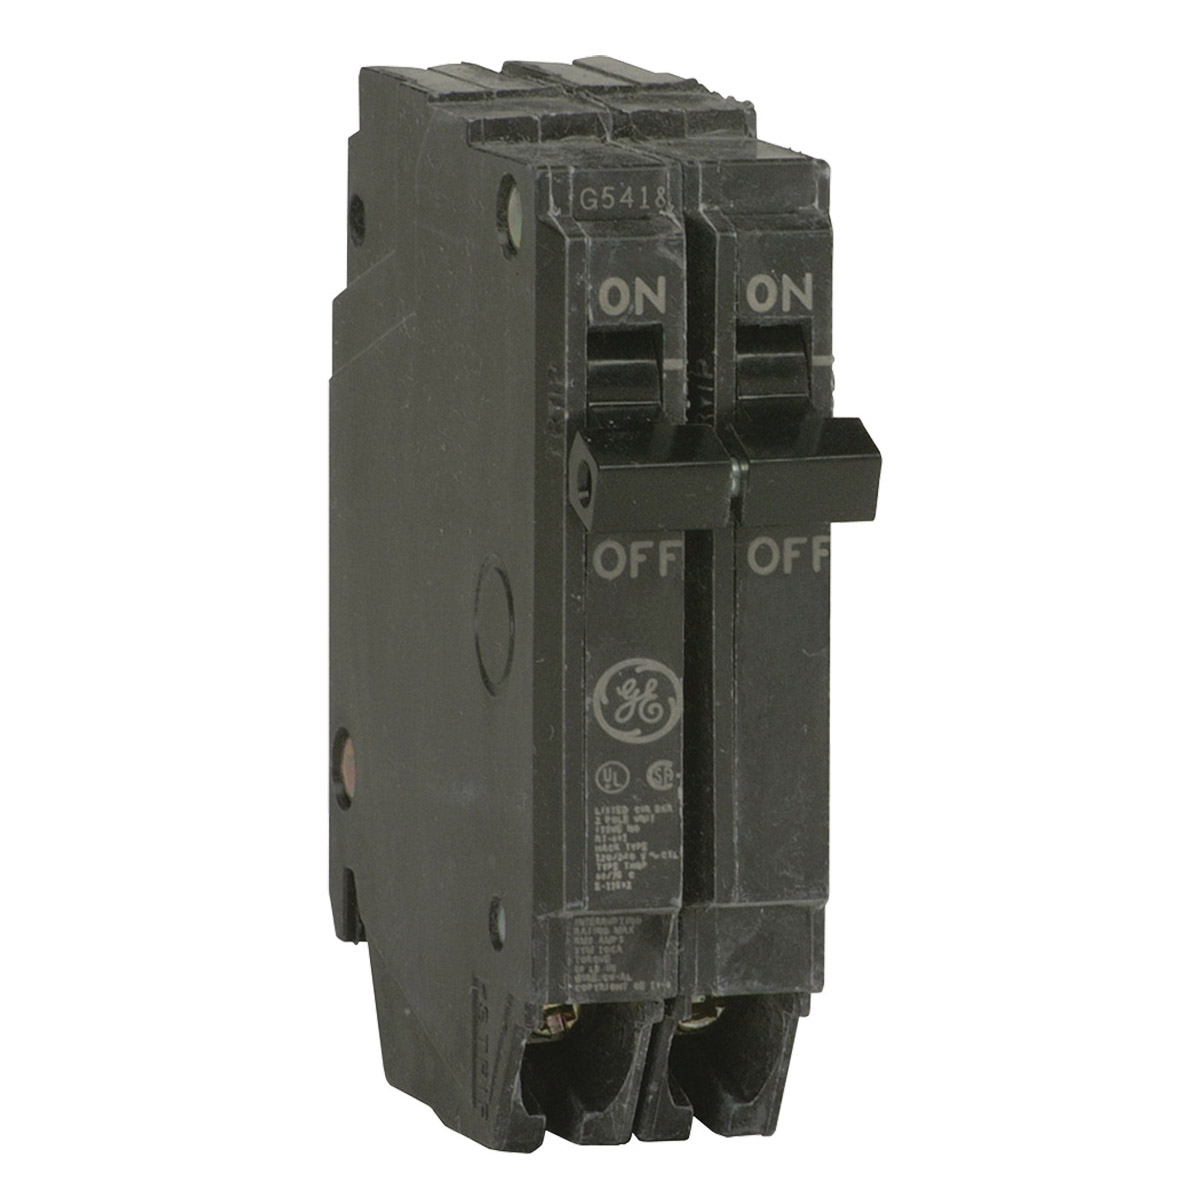 THQP230 Feeder Circuit Breaker, Type THQP, 30 Amp, 2 -Pole, 120/240 V, Plug Mounting